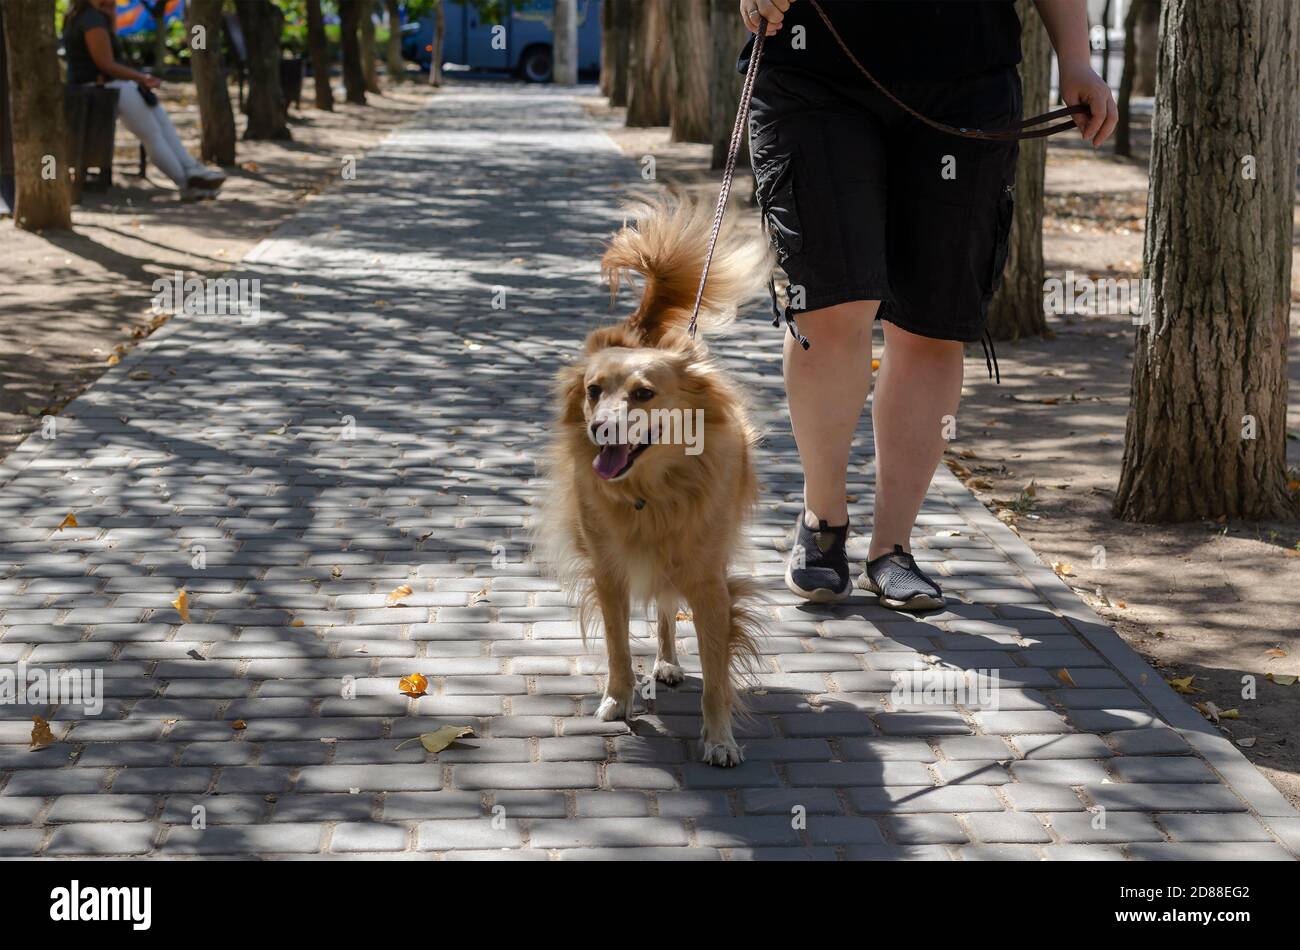 An Adult Woman Walks With Her Mixed Breed Dog Through Sunny City Long Haired Red Dog Of Mixed Breed Looks At The Camera Love For Animals Stock Photo Alamy